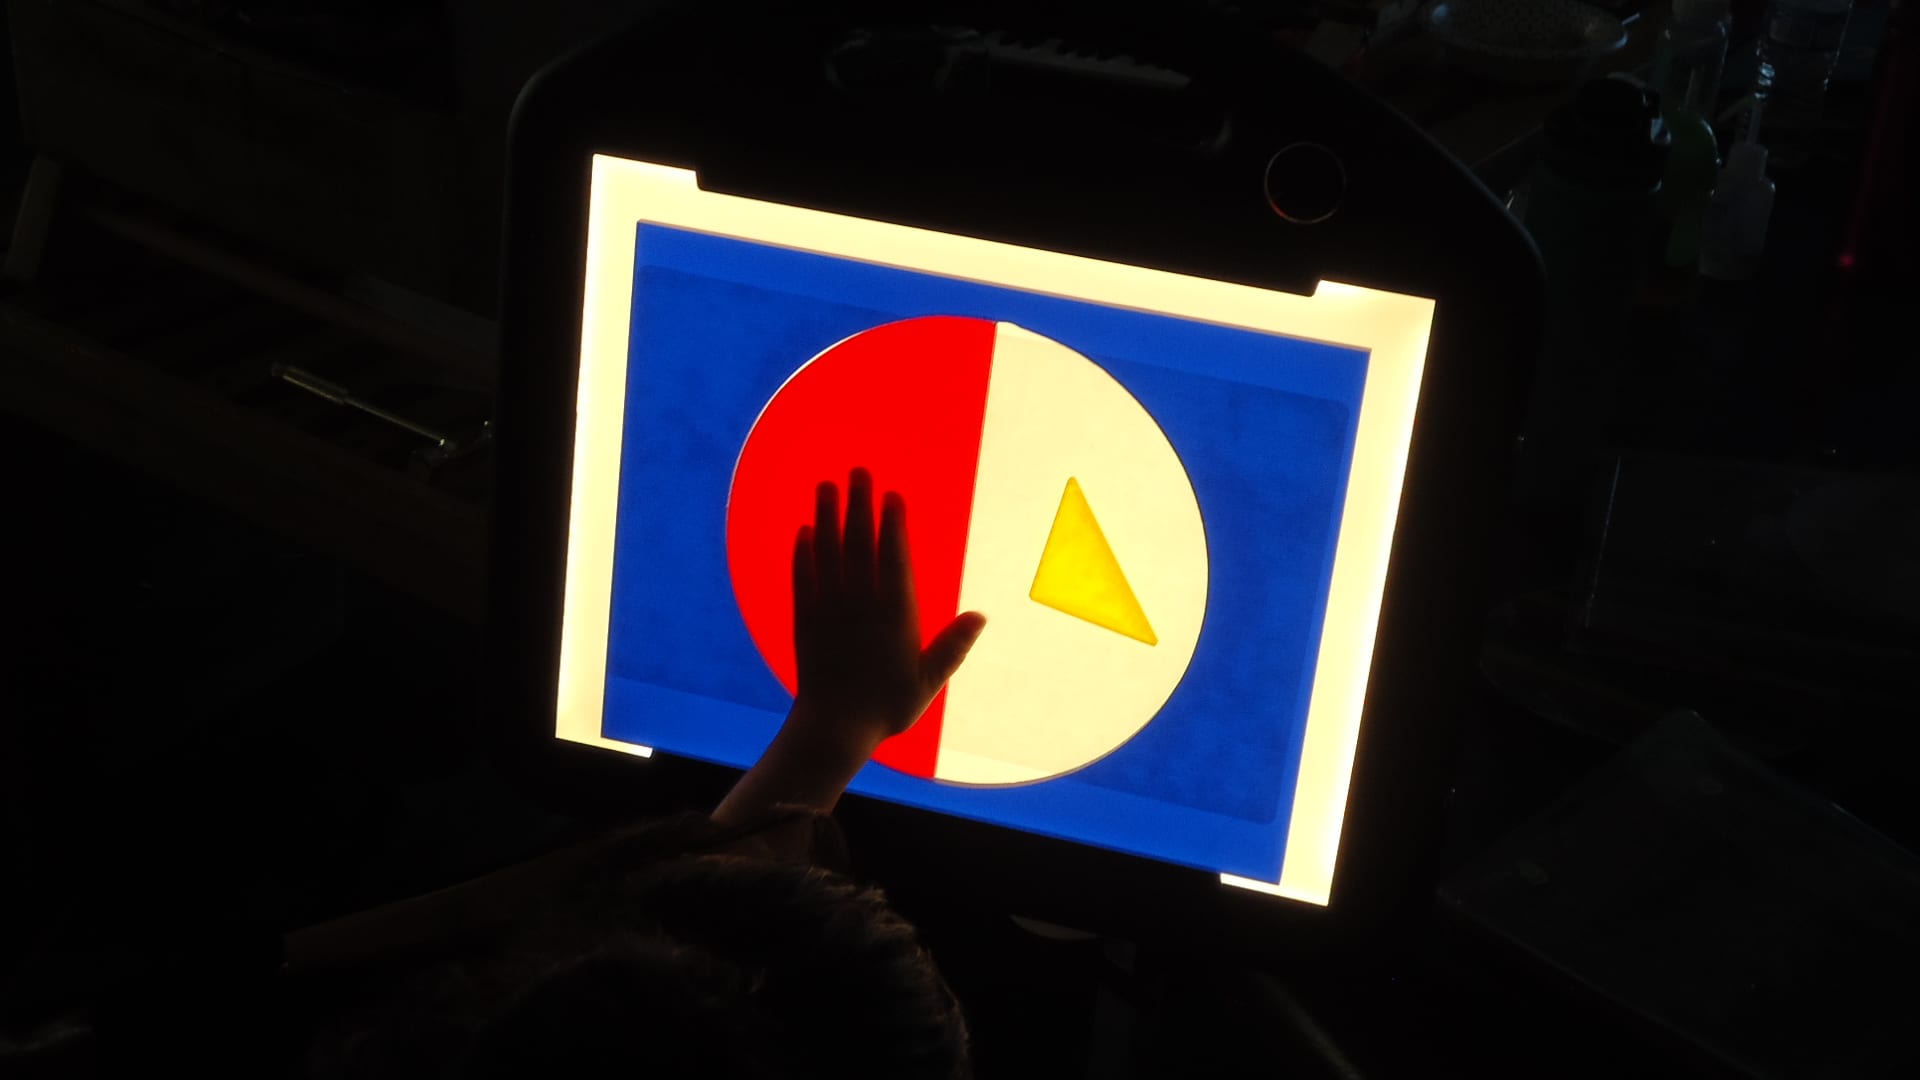 In a darkened room, a child’s hand is touching blue plexiglass frame with a circle cut out. In the circle is a red plexiglass semi-circle and yellow triangle. The black case of the LED Mini-Lite Box disappears into the darkness.